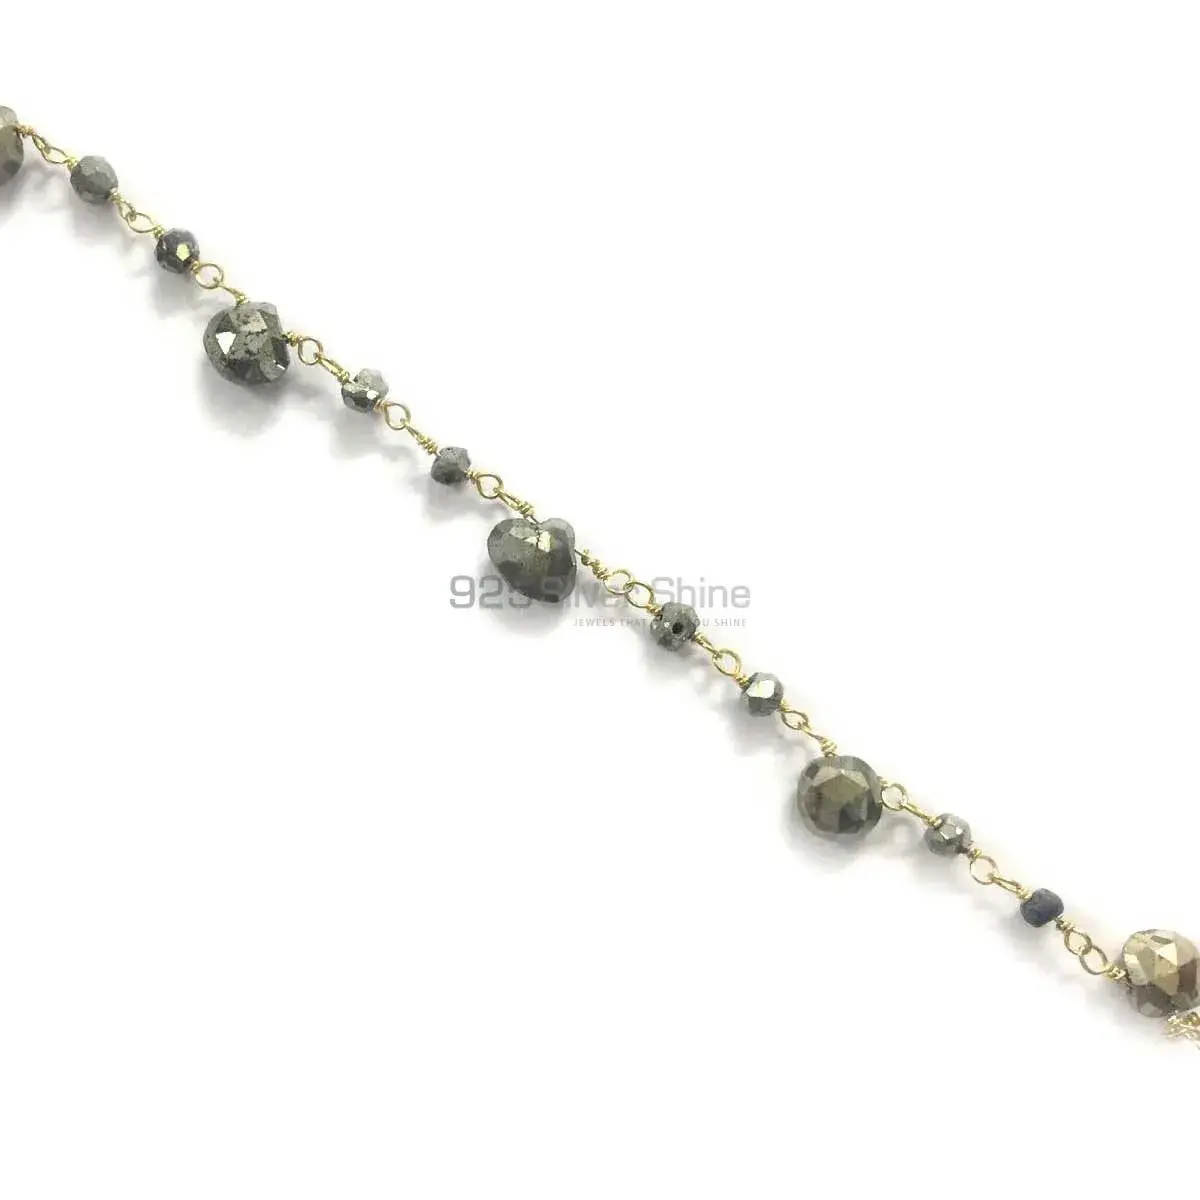 Black Pyrite Gemstone Rosary Chain. "Wire Wrapped 1 Feet Roll Chain" 925RC183